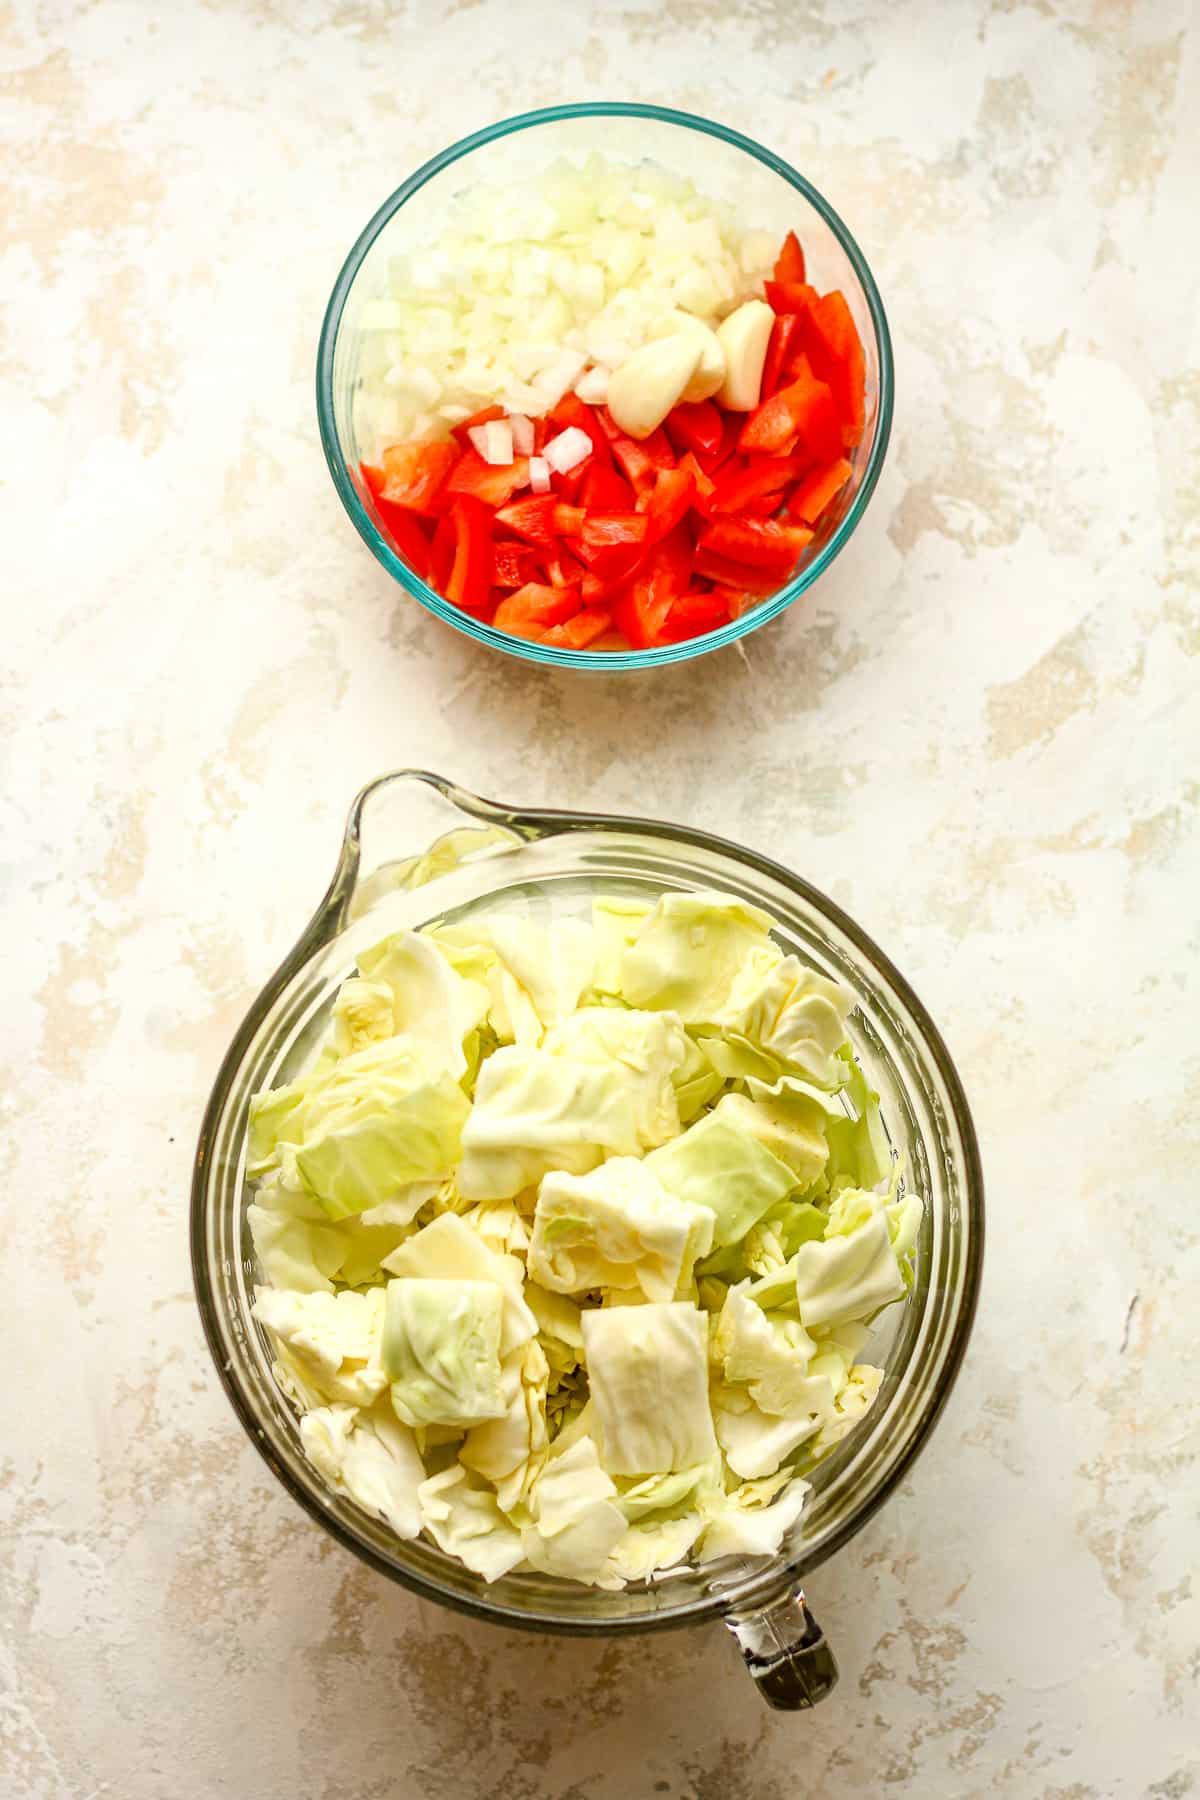 A bowl of the diced onion and peppers and a large measuring cup of the chopped cabbage.